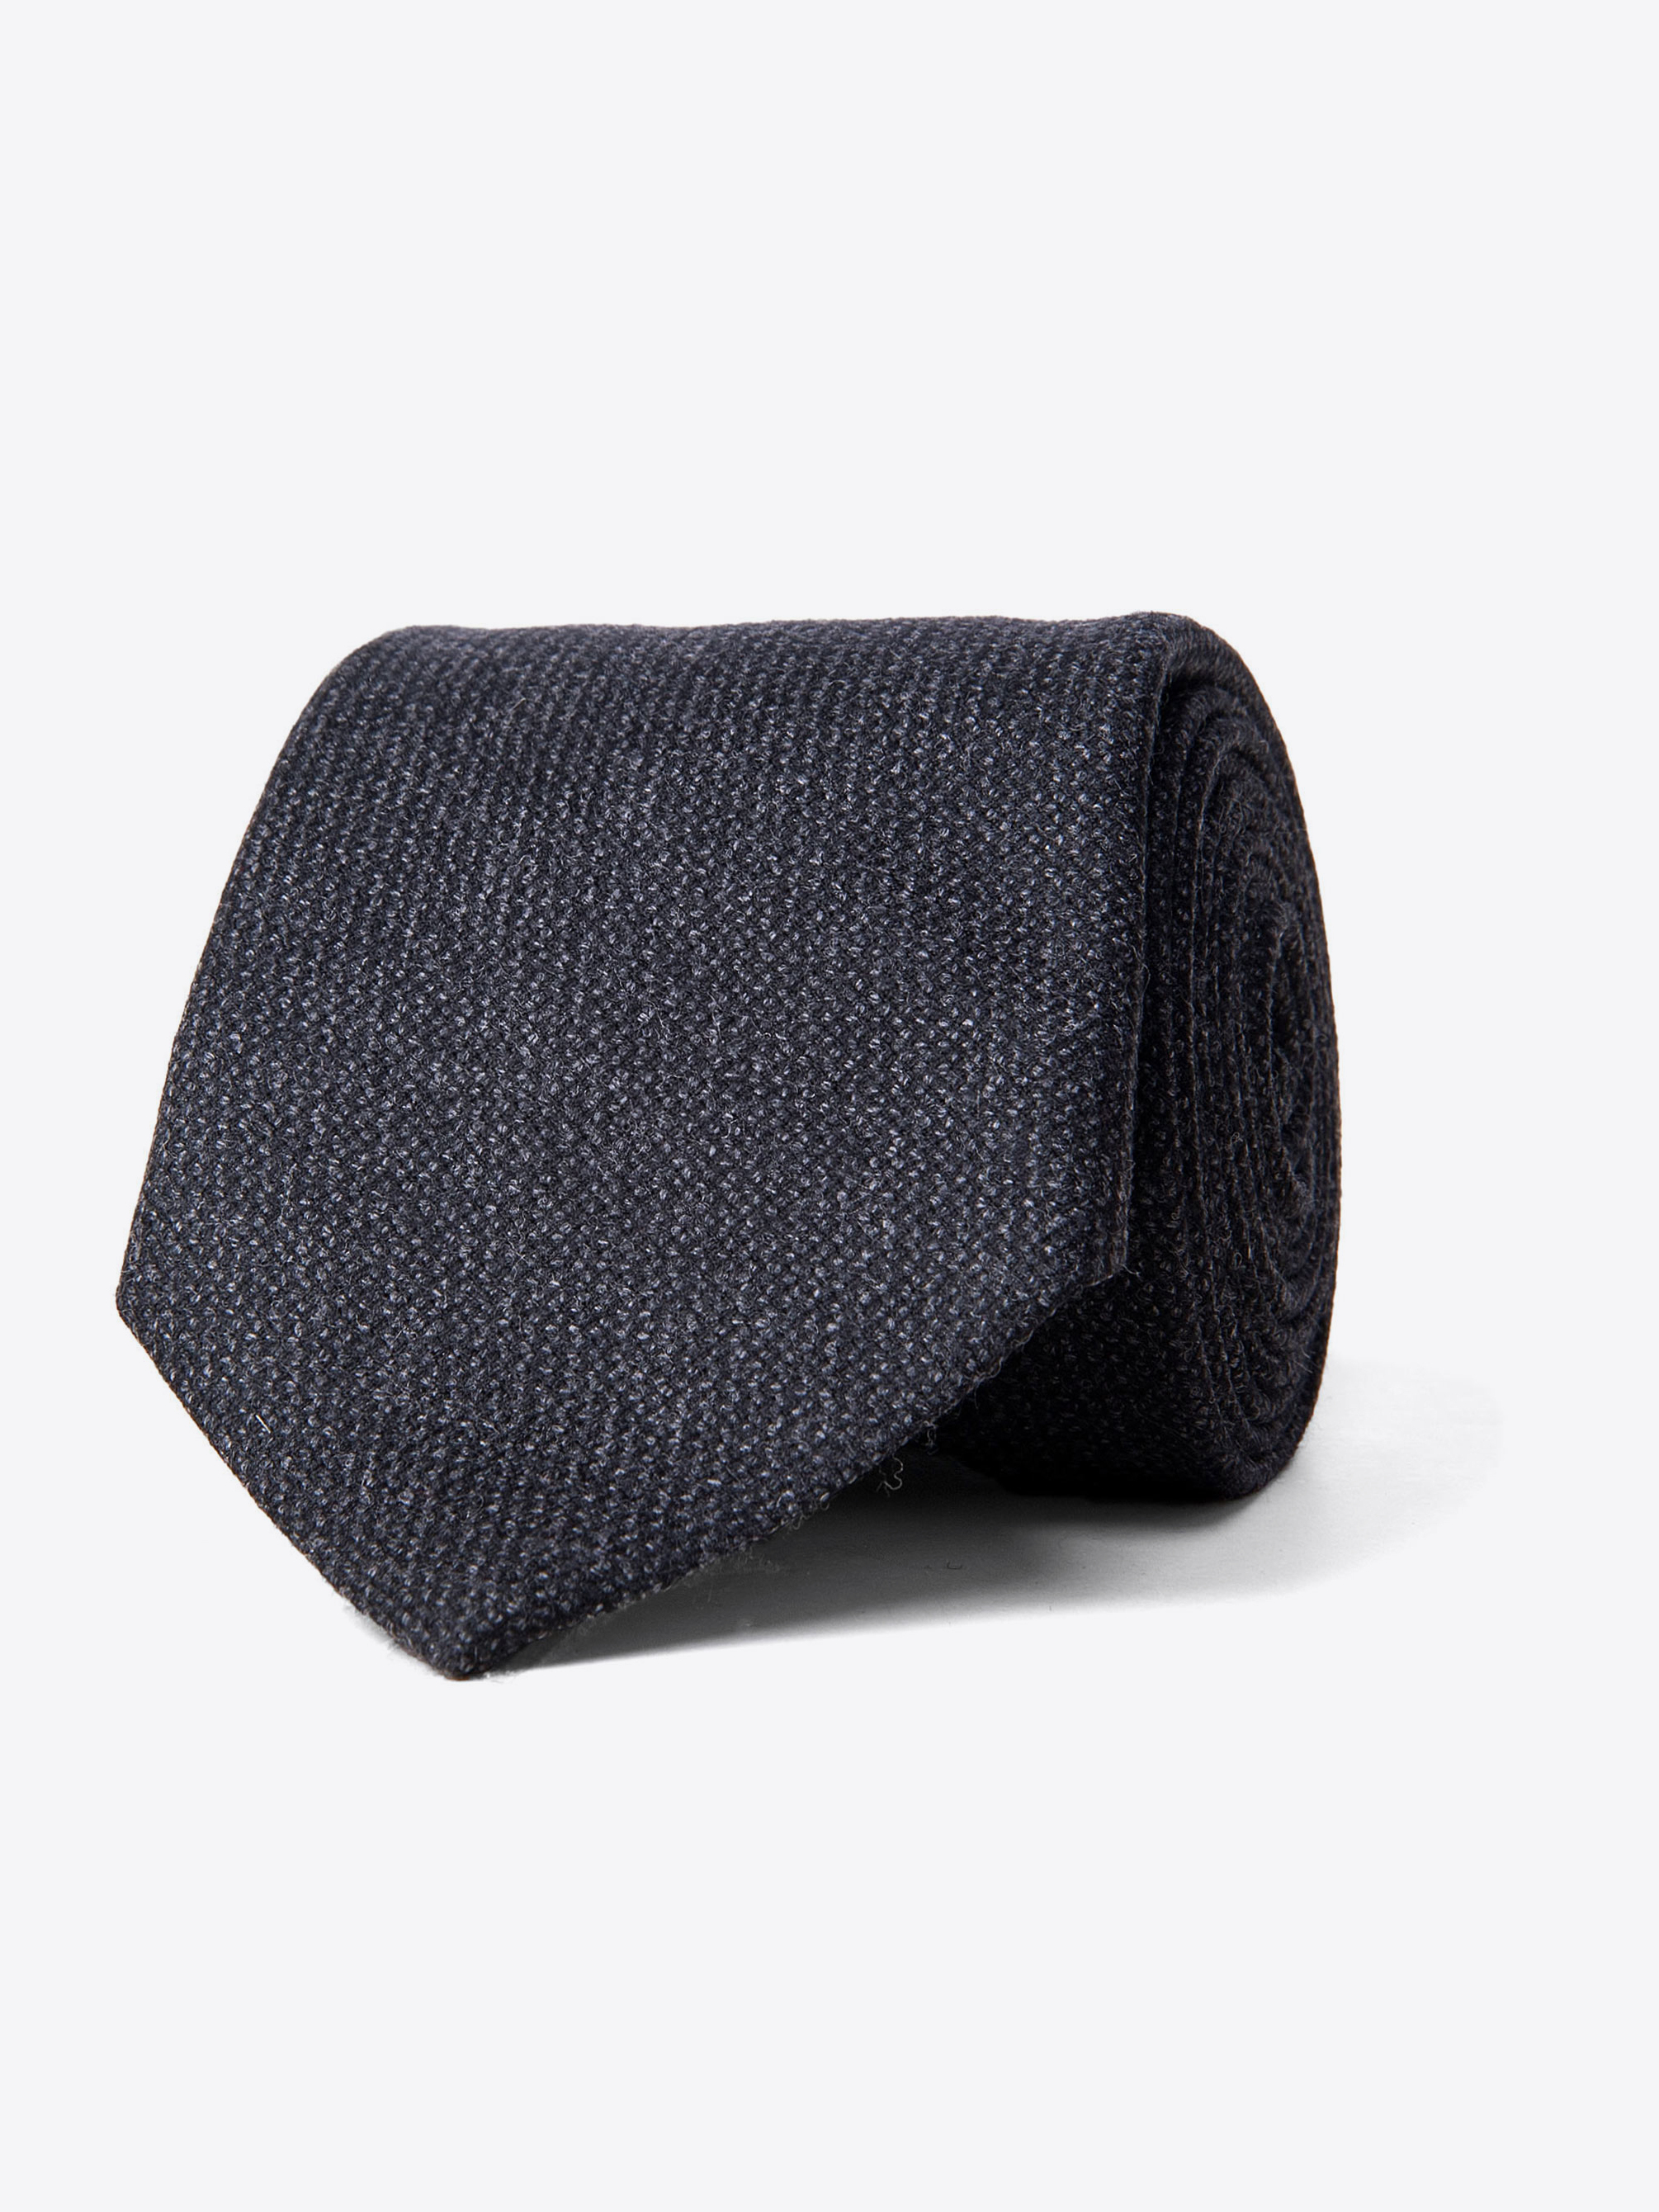 Zoom Image of Charcoal Solid Cashmere Tie